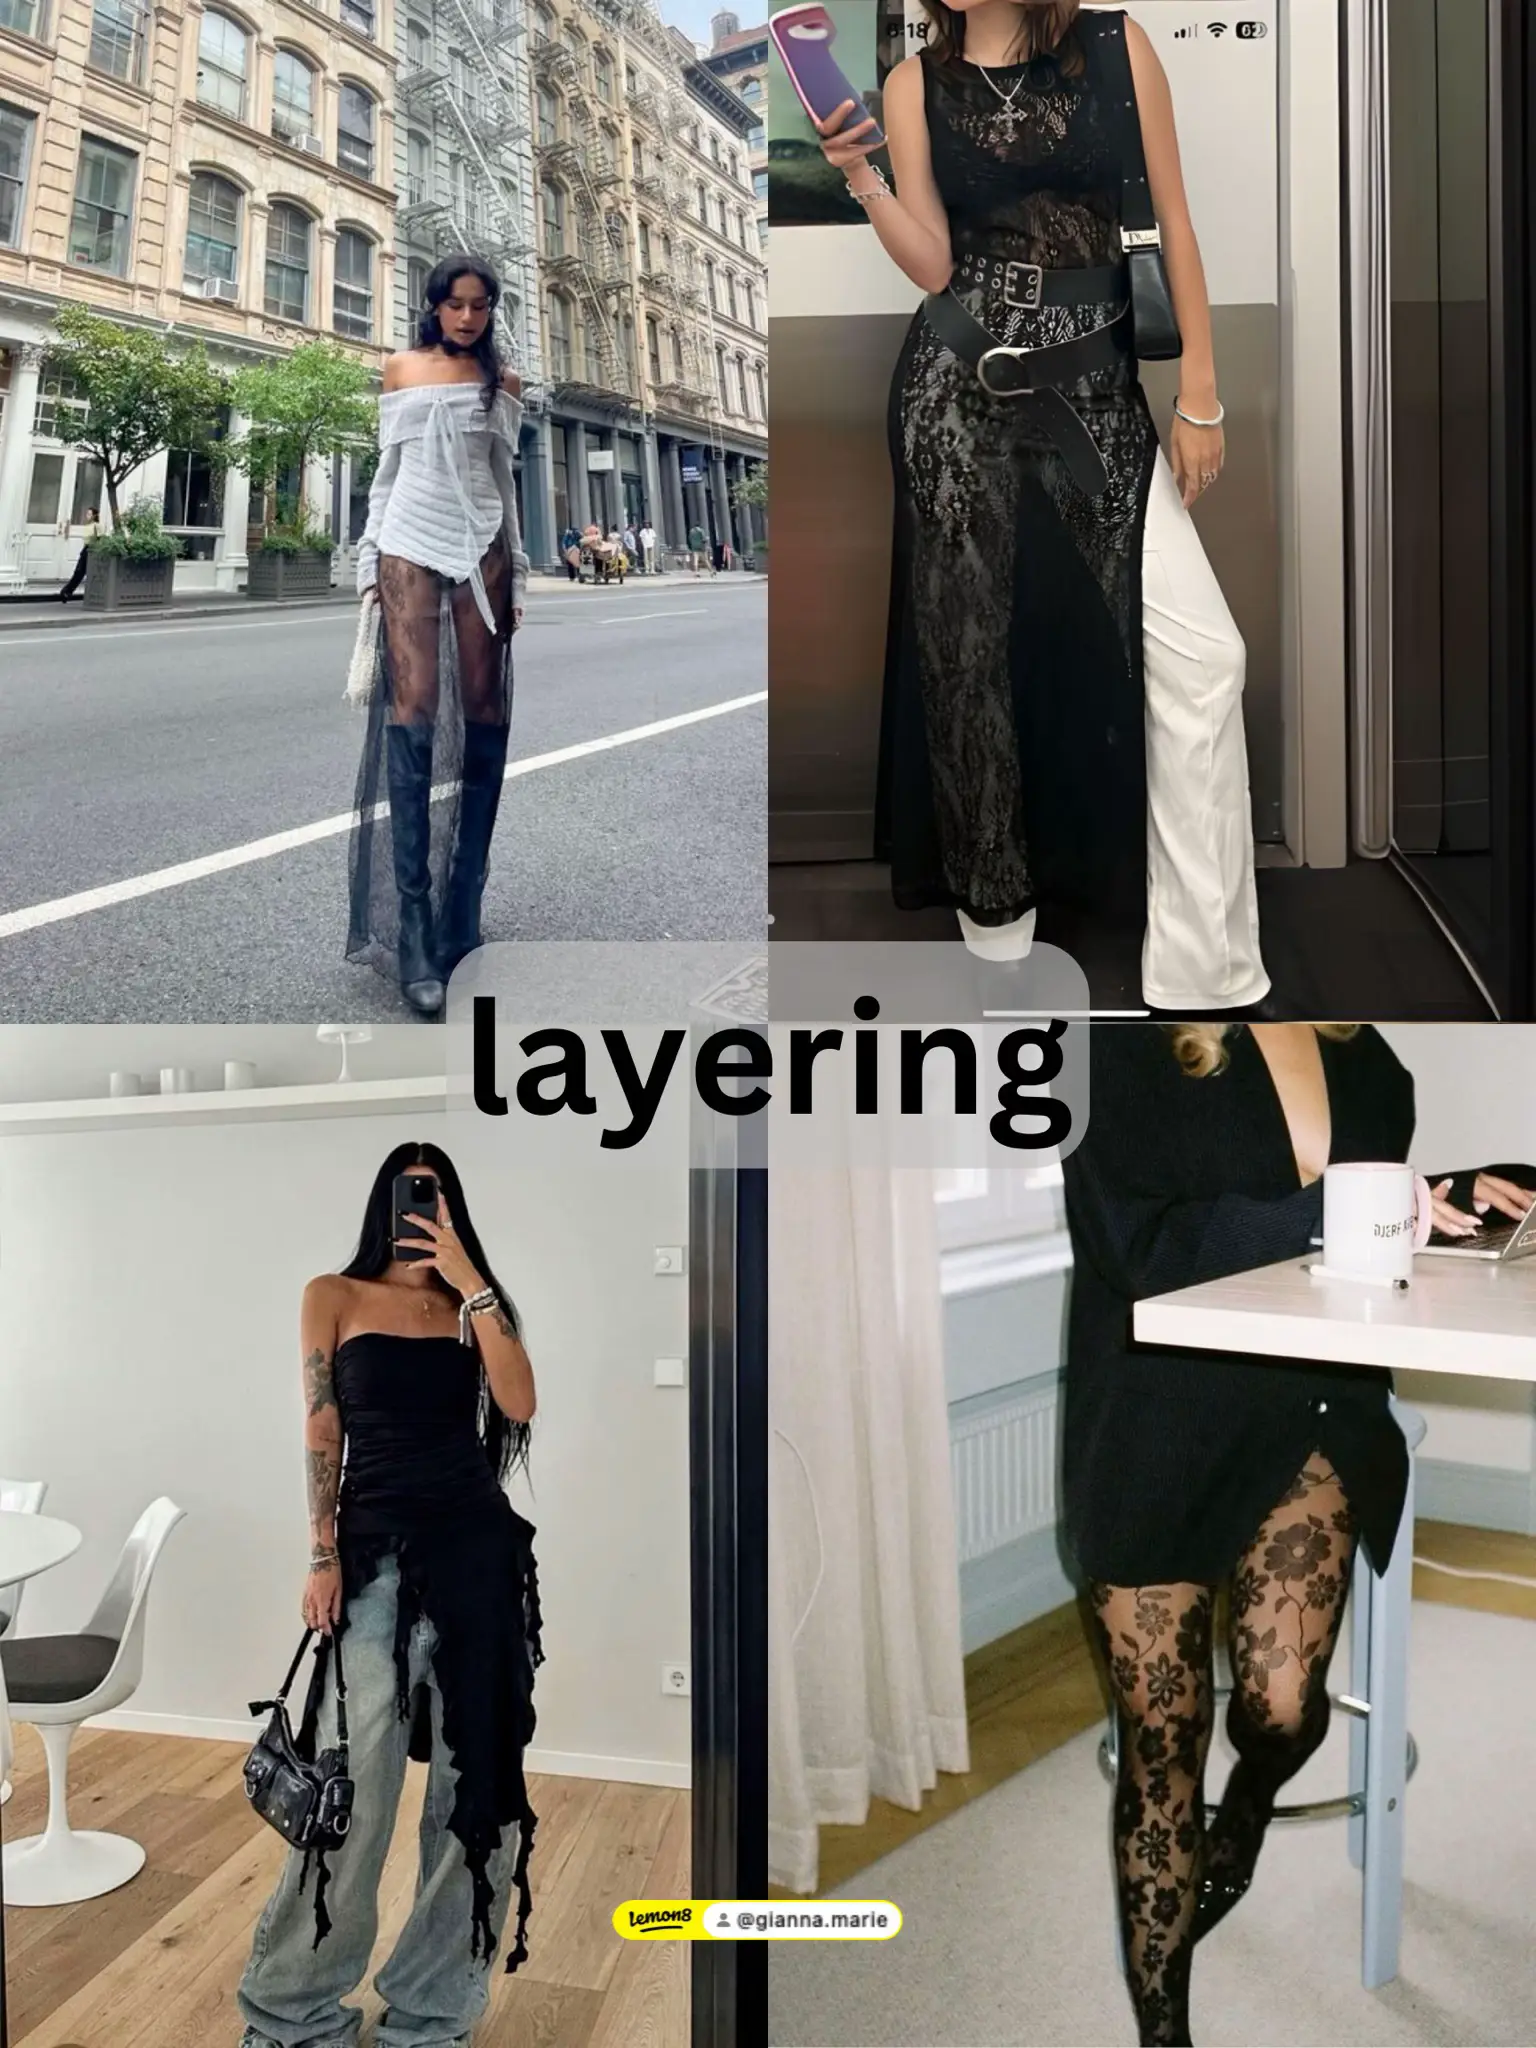 Outfits I wore last week #fashiontrends #fashionstyle #styleinspo